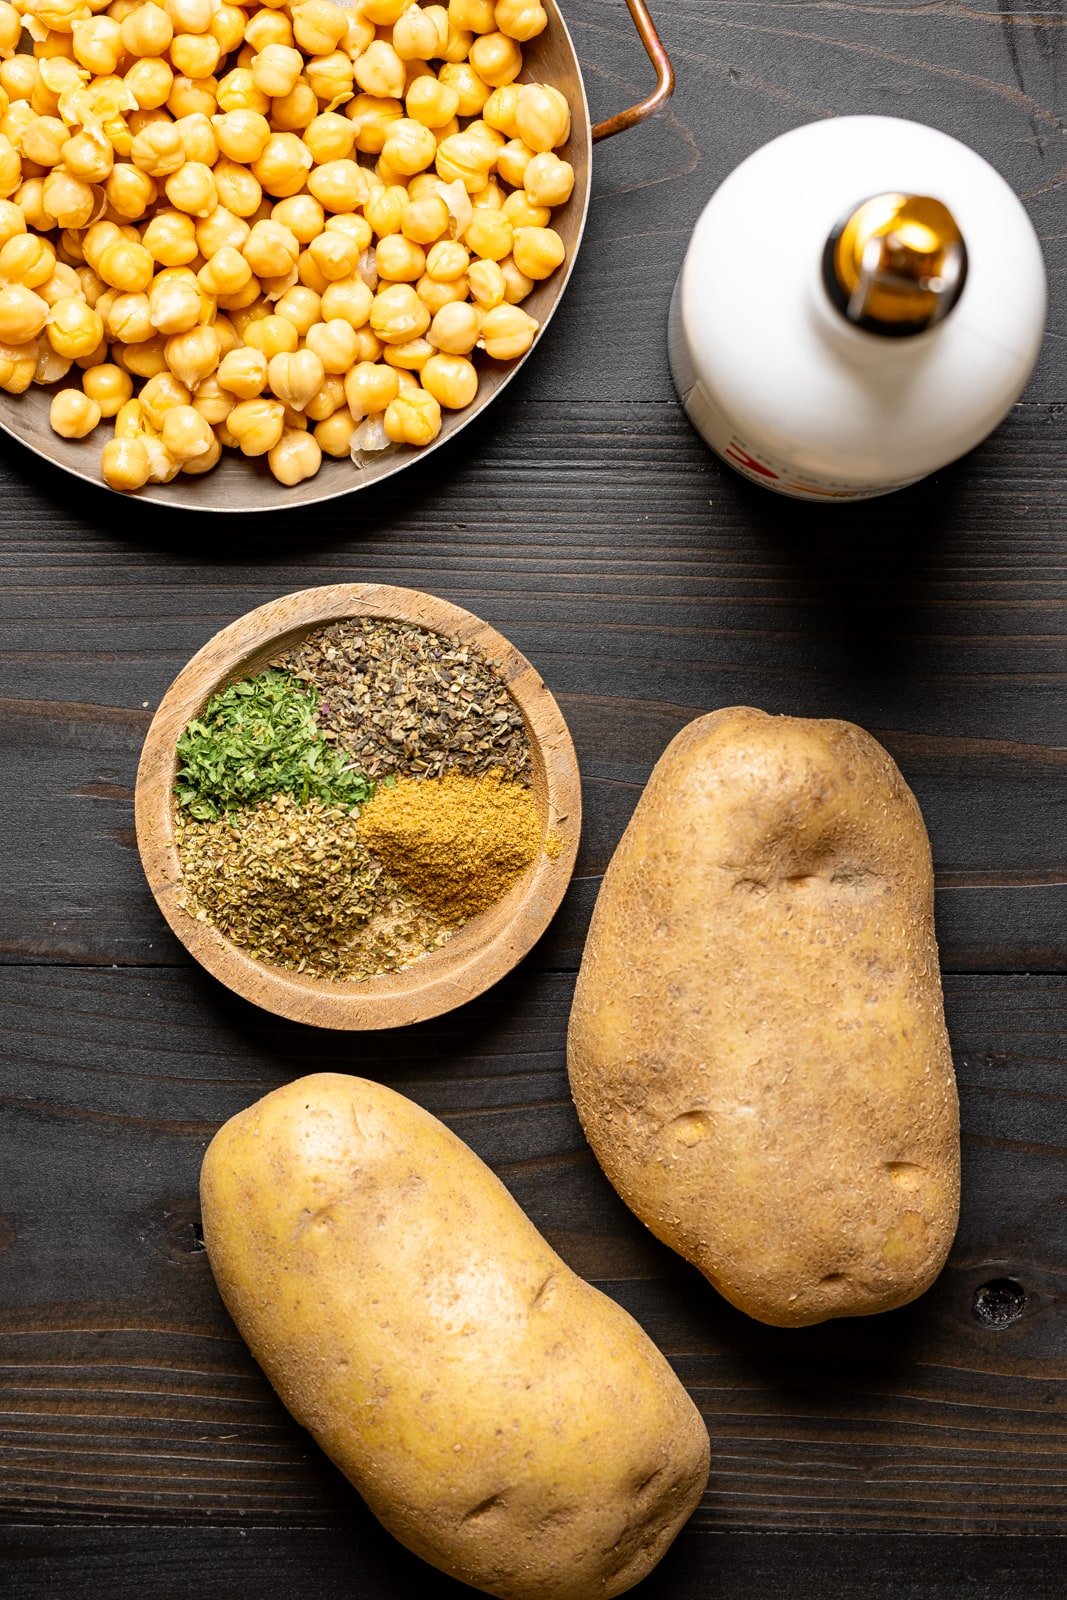 Ingredients on a black wood table including potatoes, olive oil, chickpeas, and herbs + seasonings.